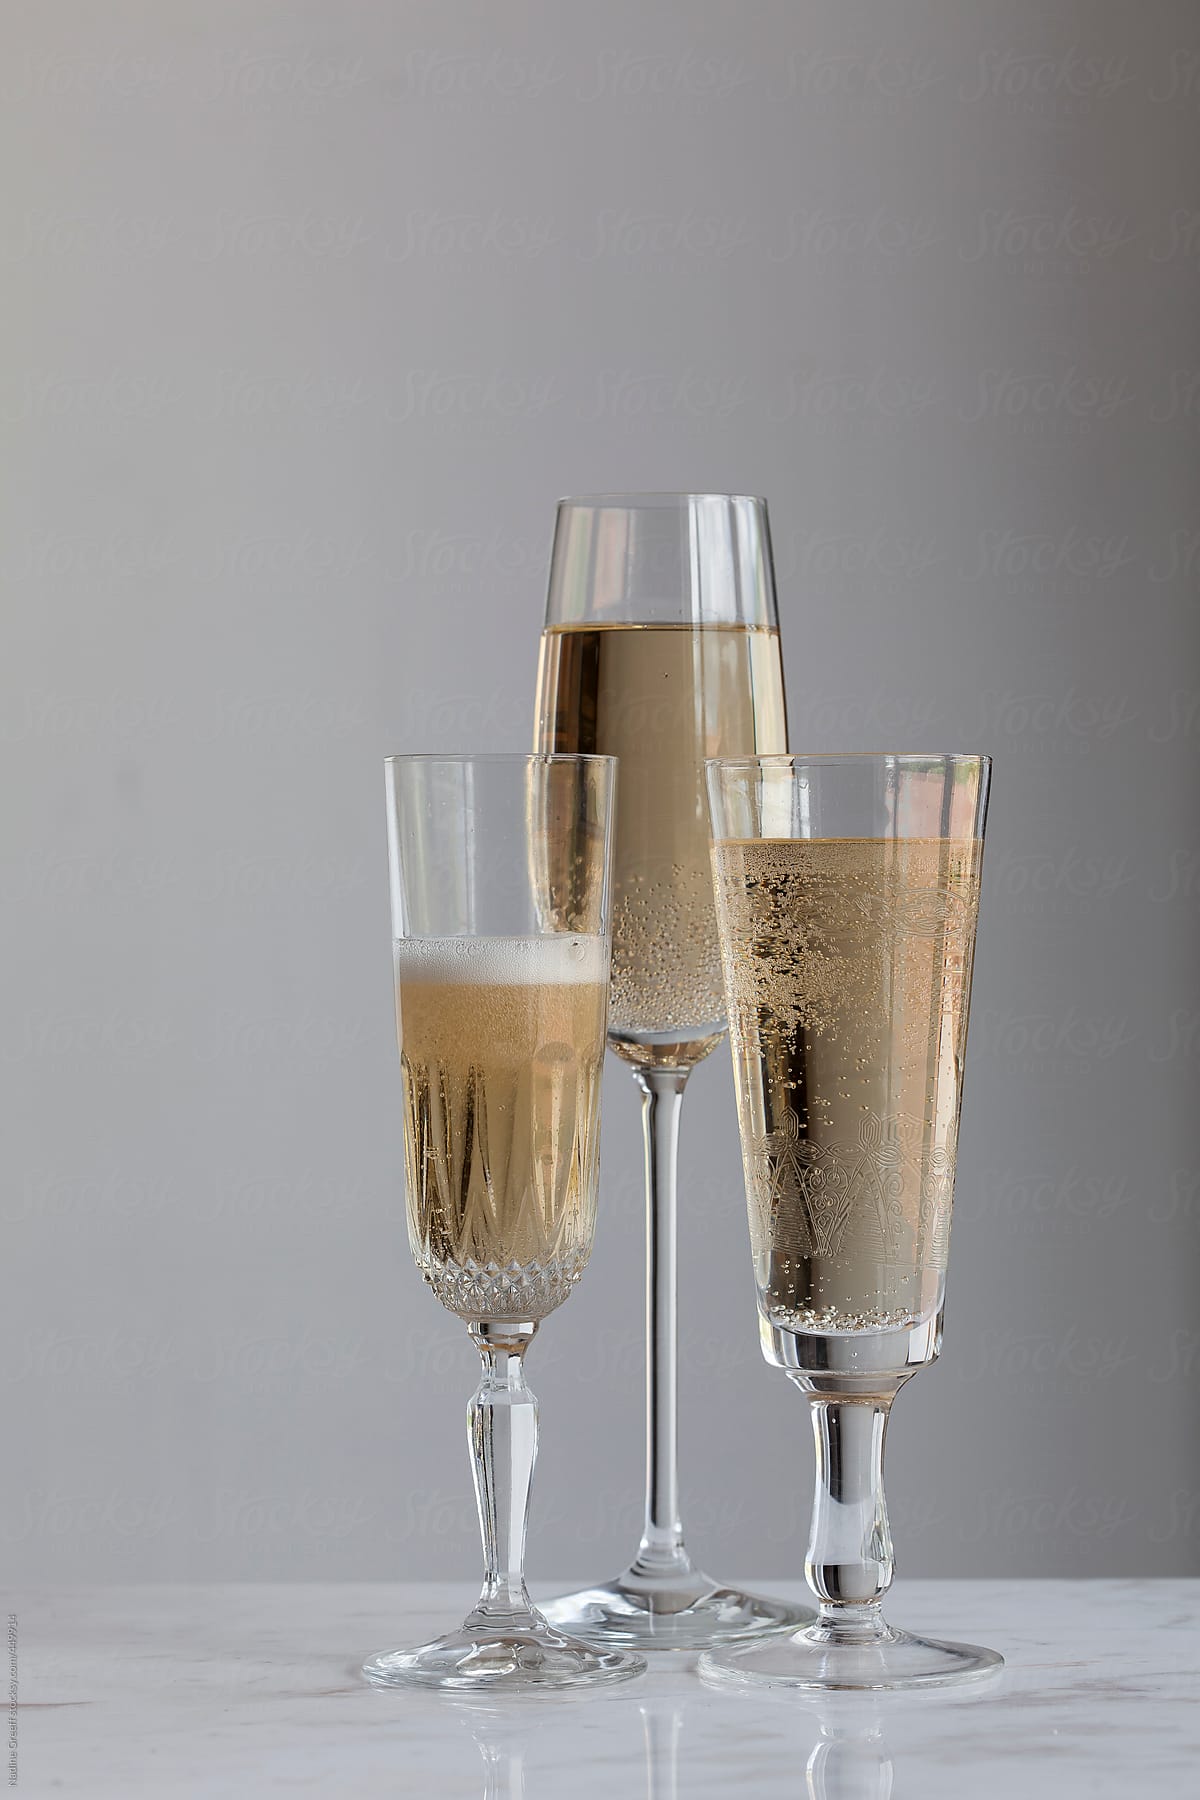 Glasses of bubbly champagne